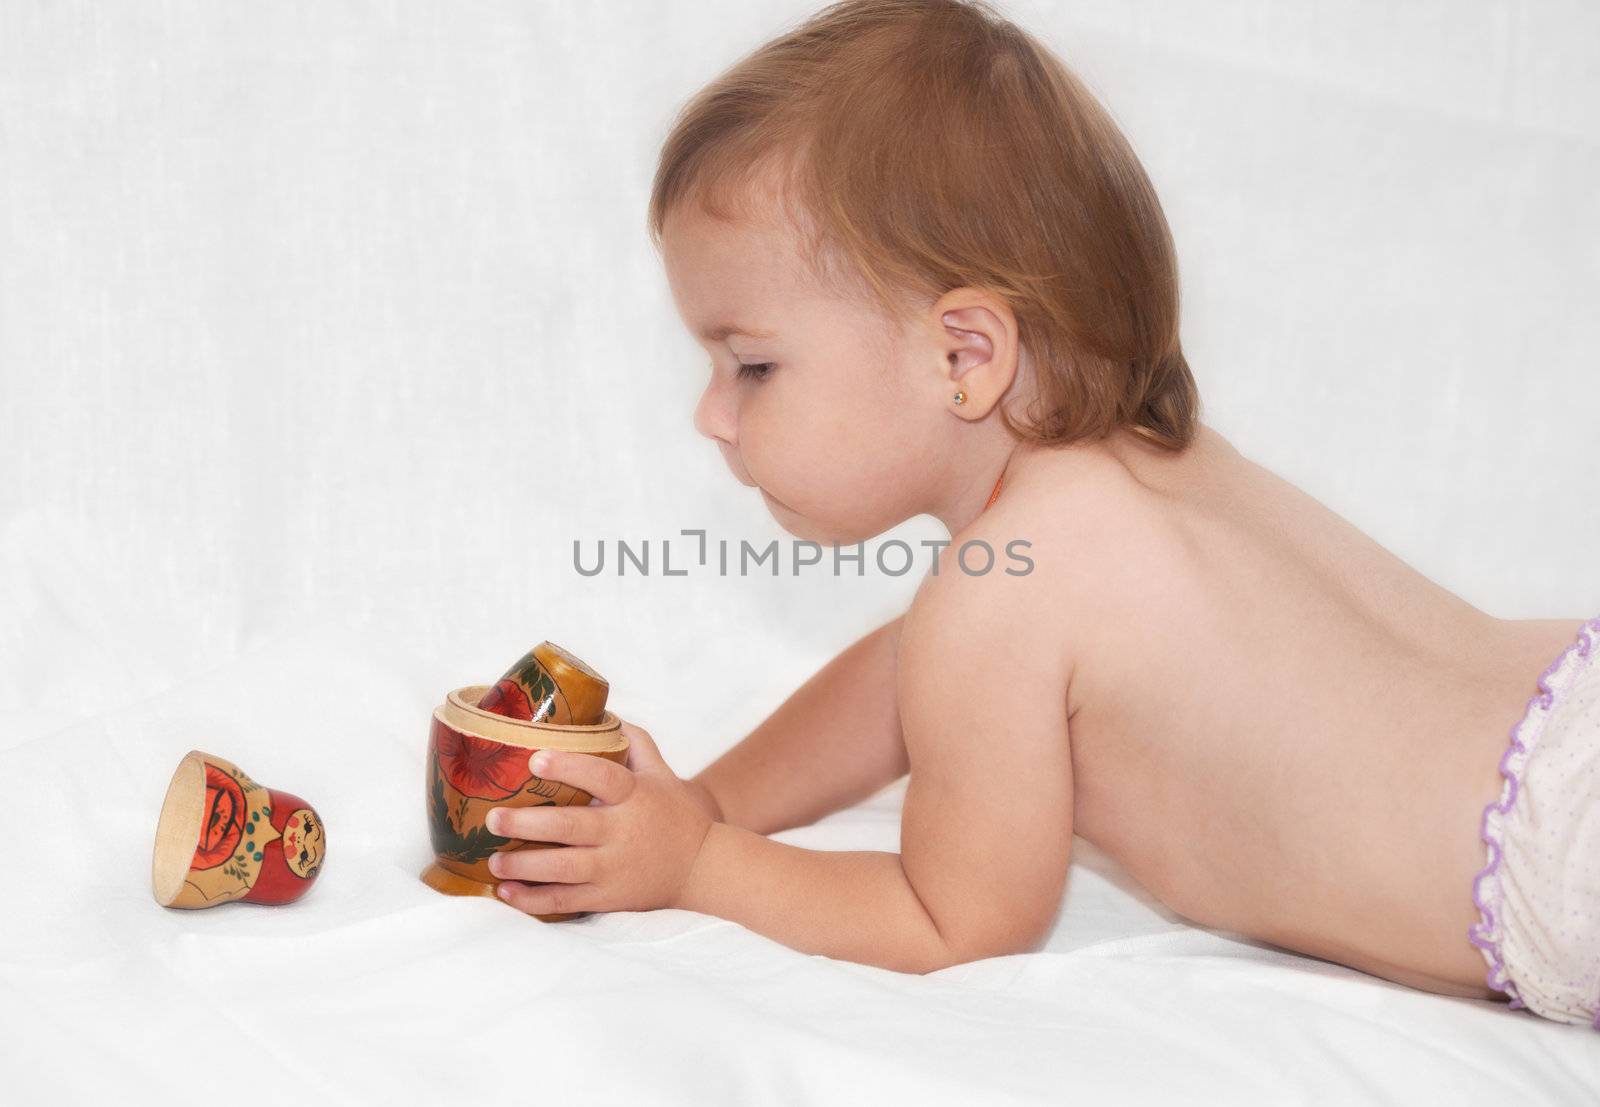 The beautiful baby plays by a toy a bed